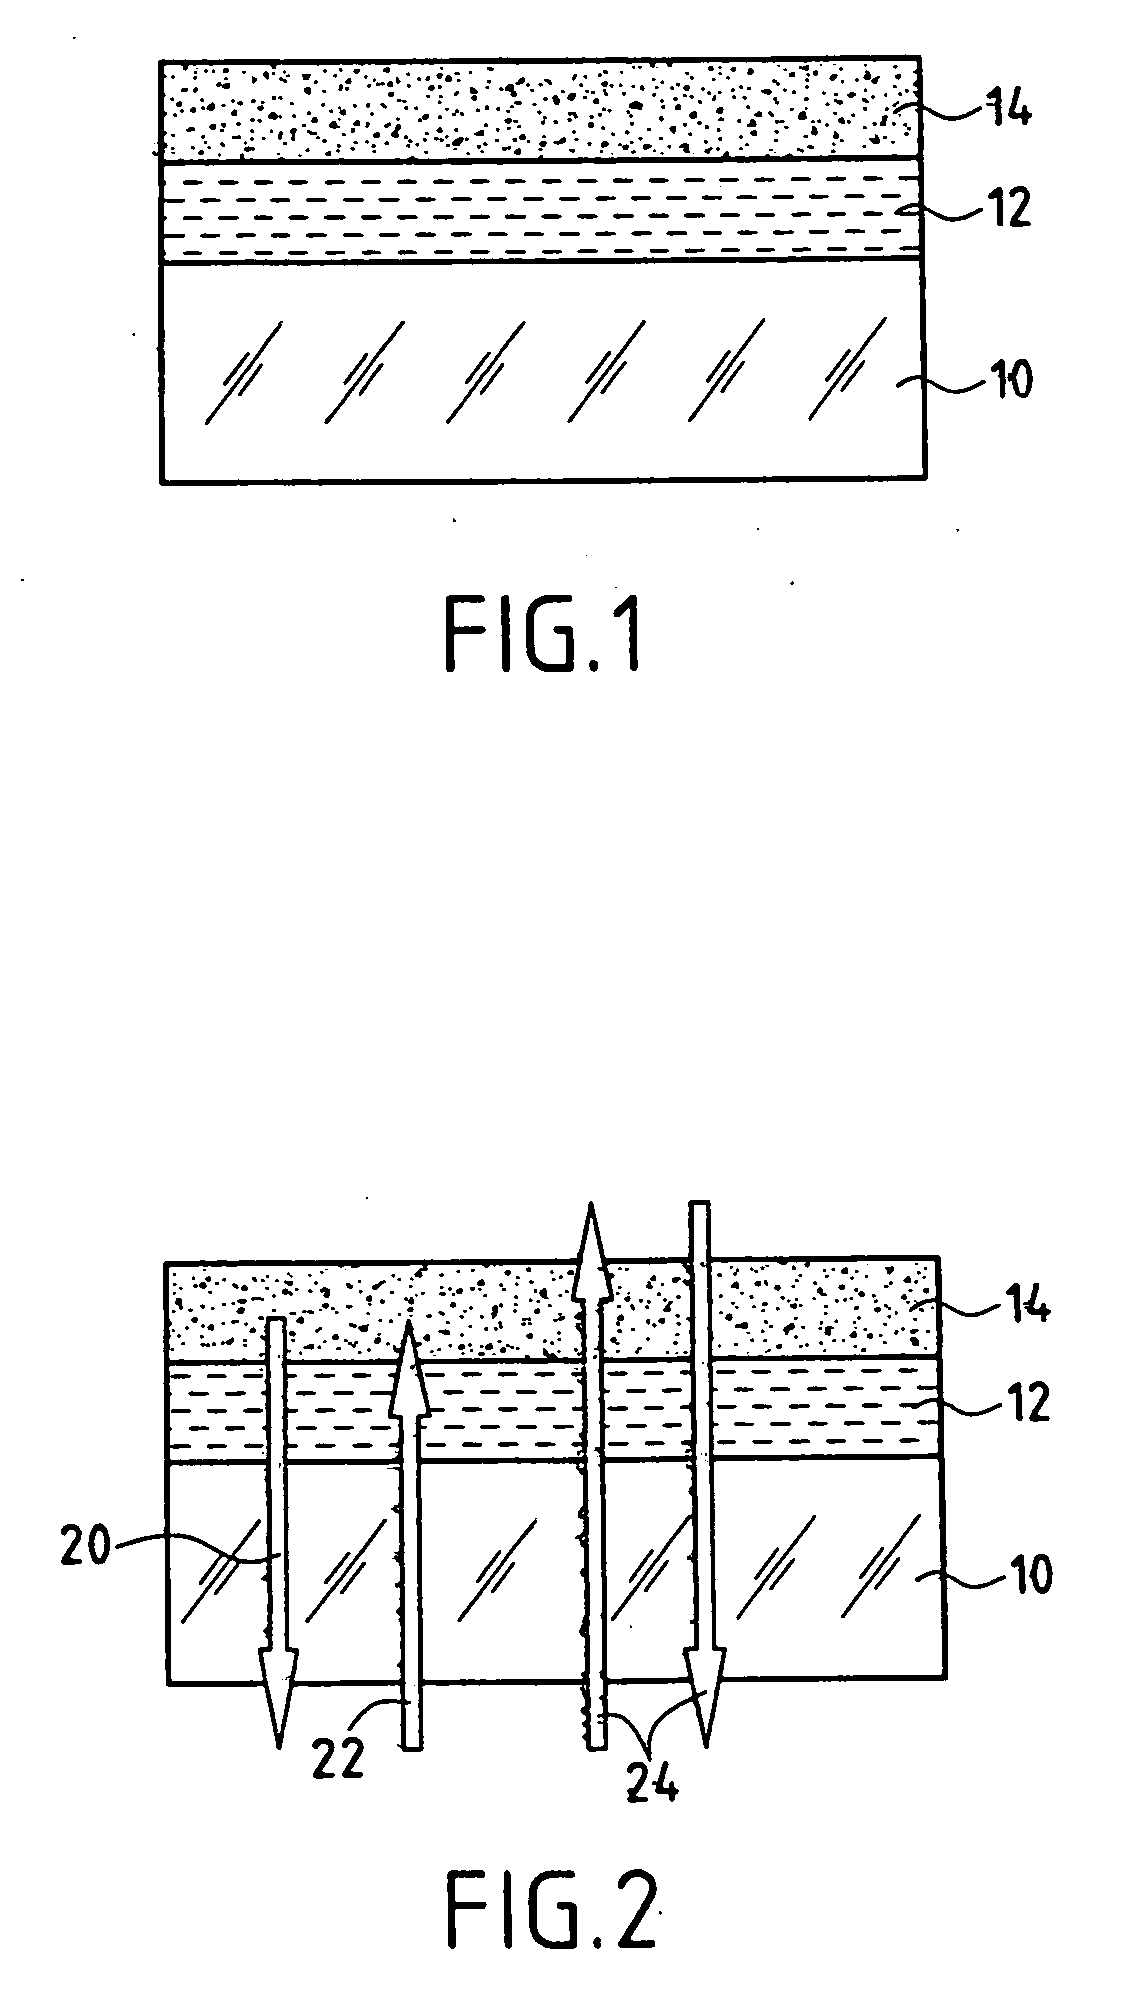 Substrate with refractive index matching